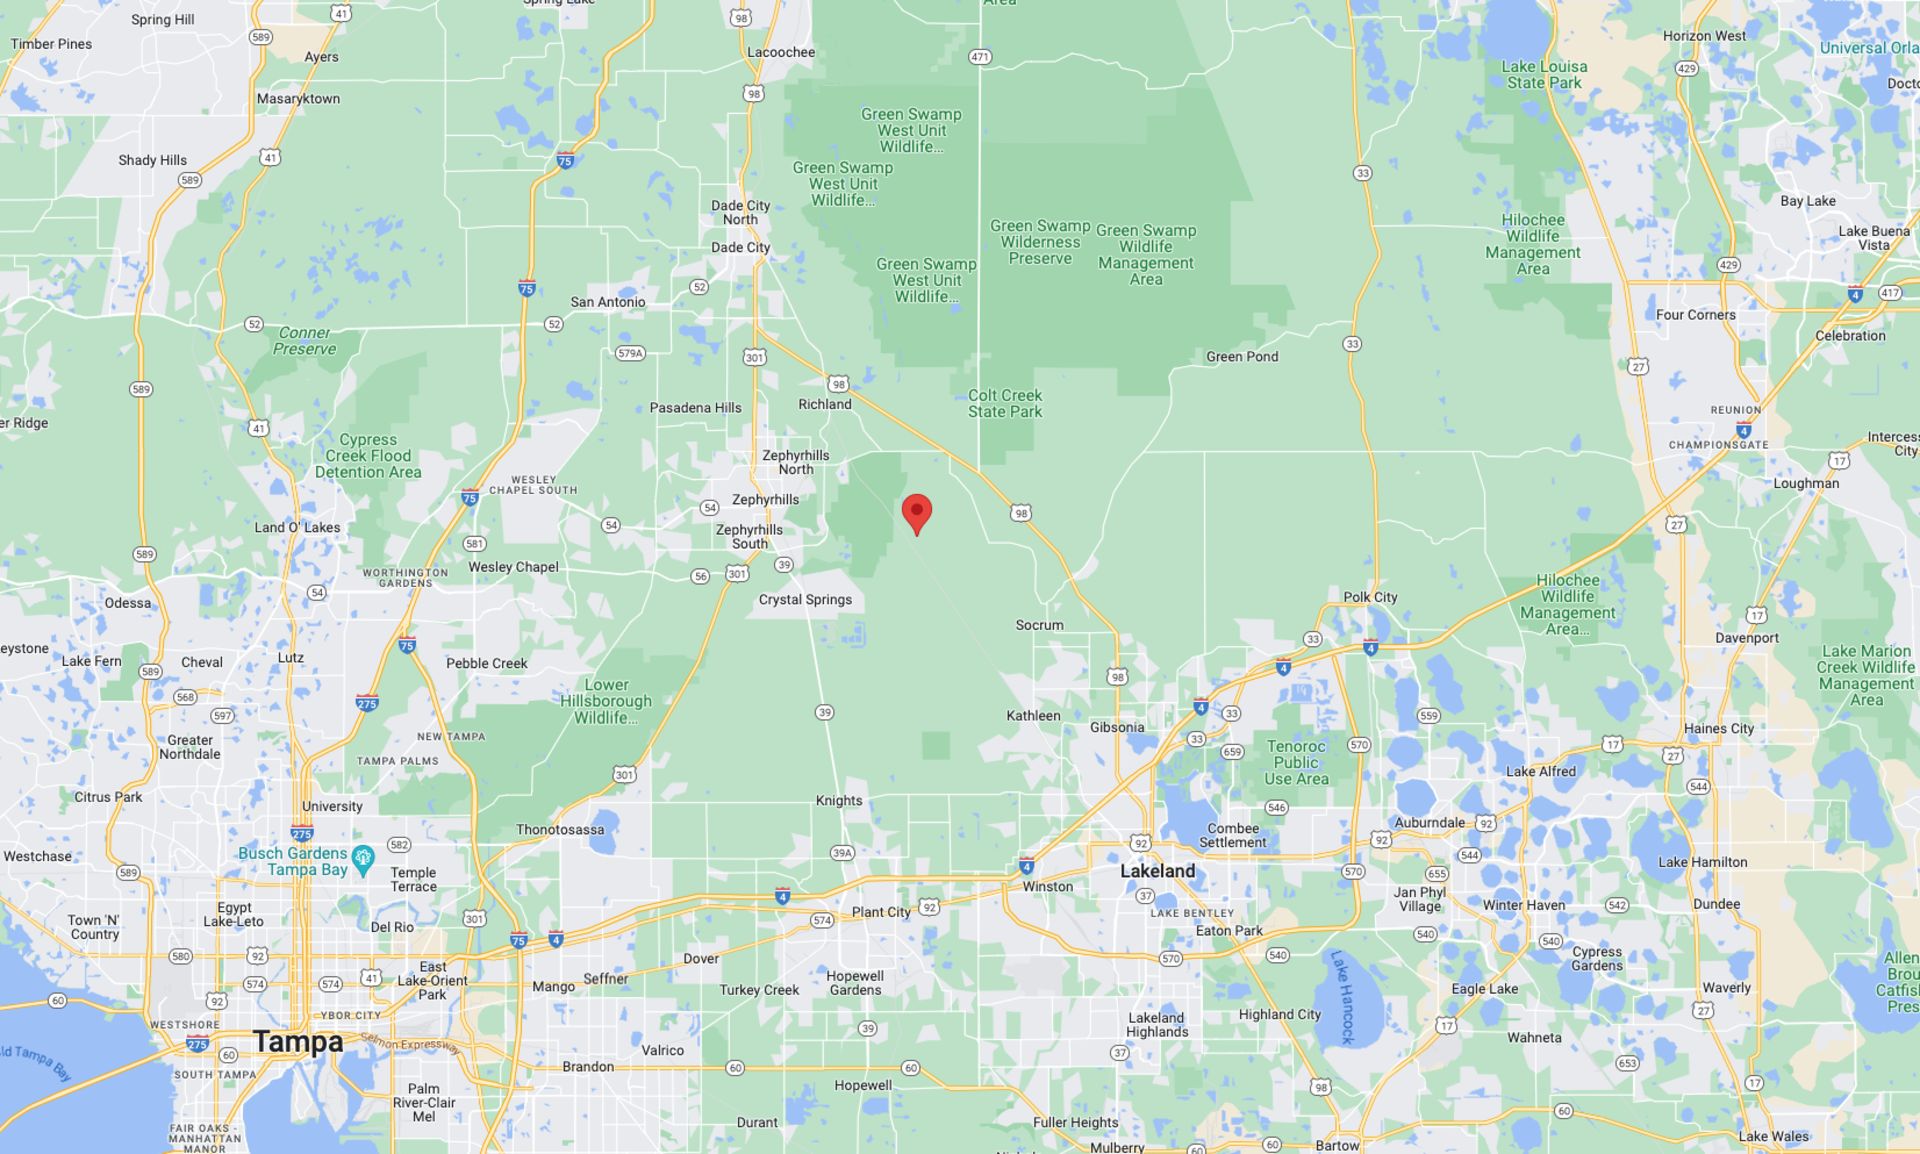 Diversify Your Land Investments: Secure 1.26 Acres in Florida! - Image 10 of 12